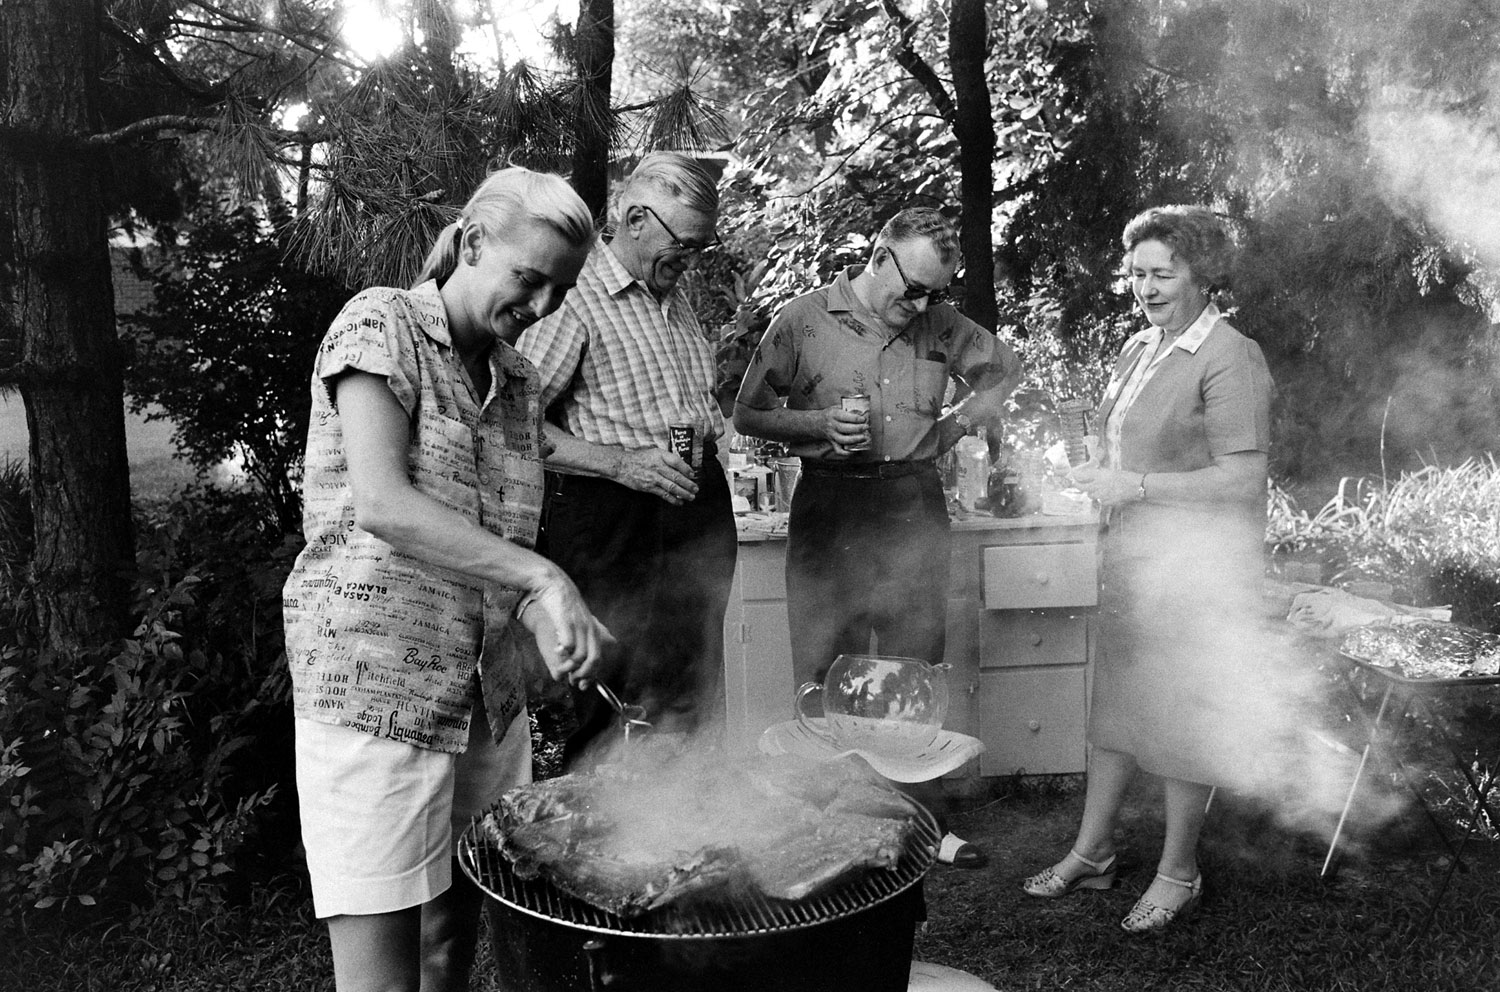 One of only thirteen American women — known as the Mercury 13 — to participate in NASA's Mercury space program, Jerrie Cobb (left) barbecues in 1959.